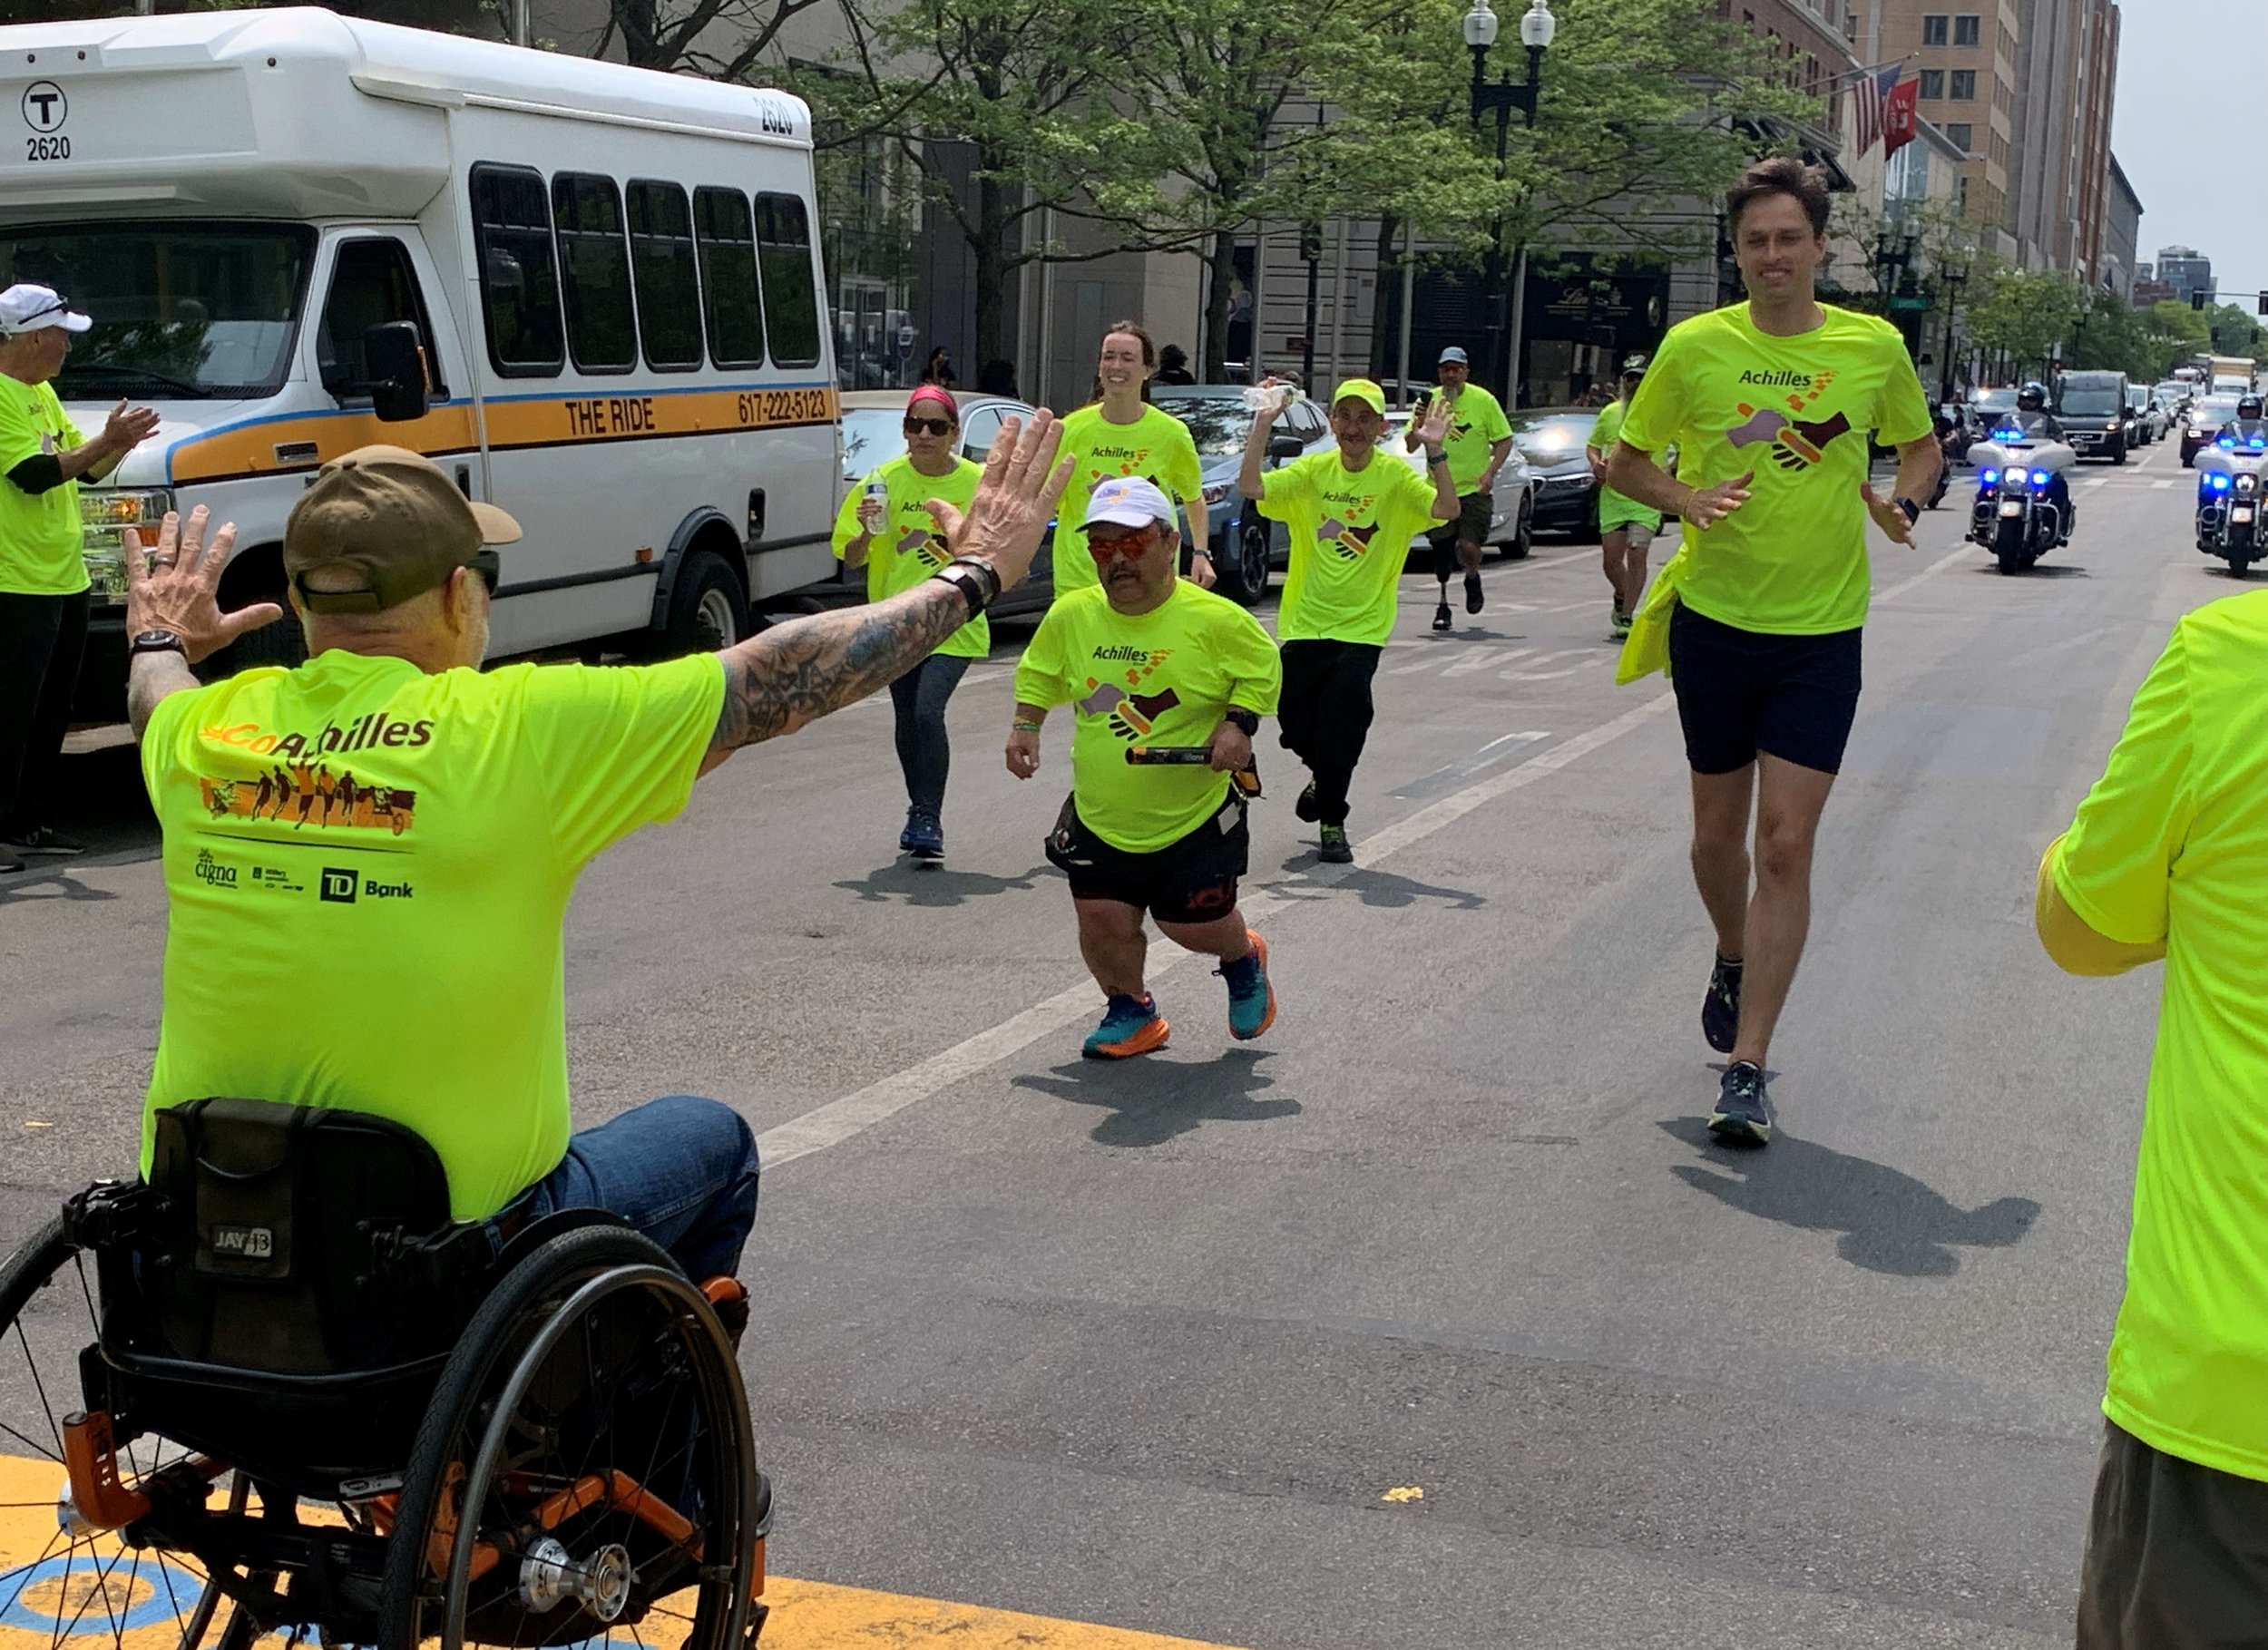  Achilles member in a wheelchair cheering on another Achilles member who is about to cross the finish line 